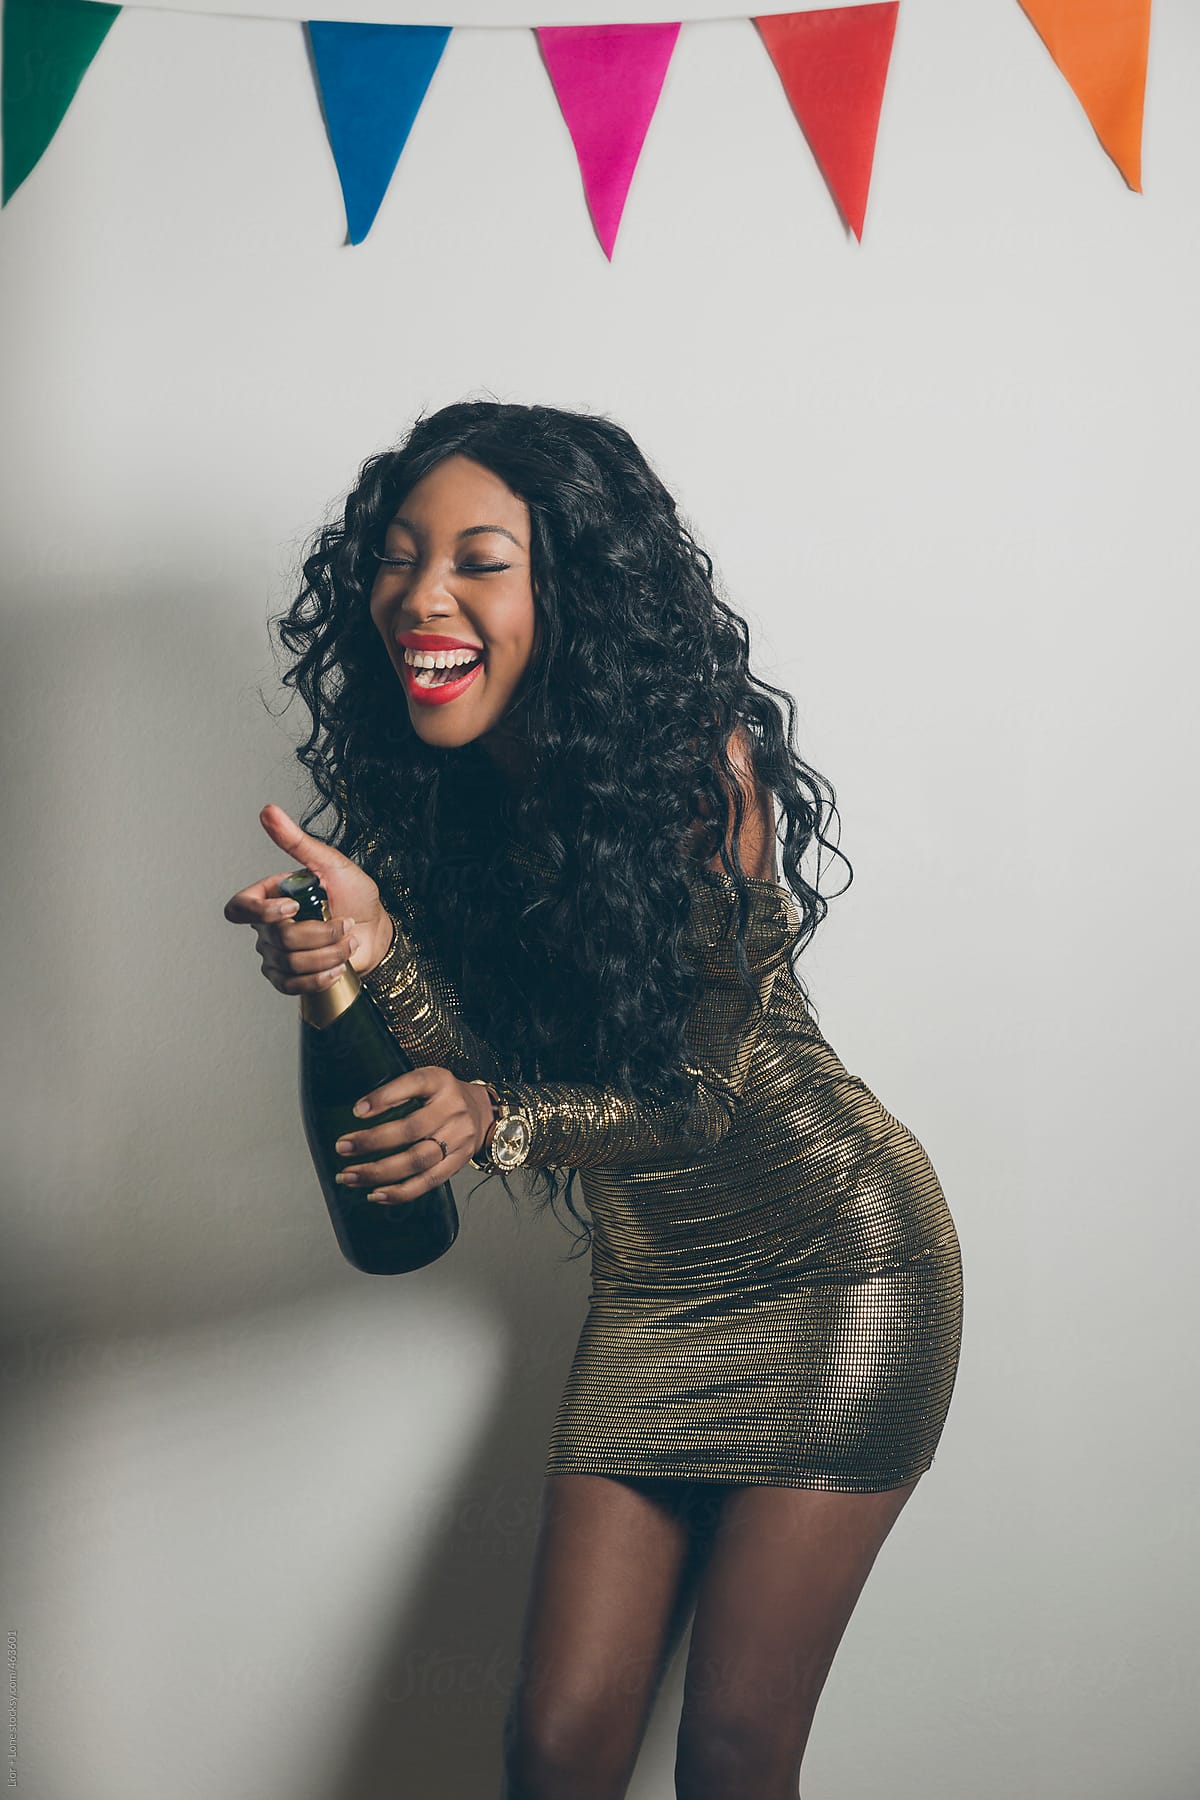 Black woman laughing while opening a champagne bottle at a party